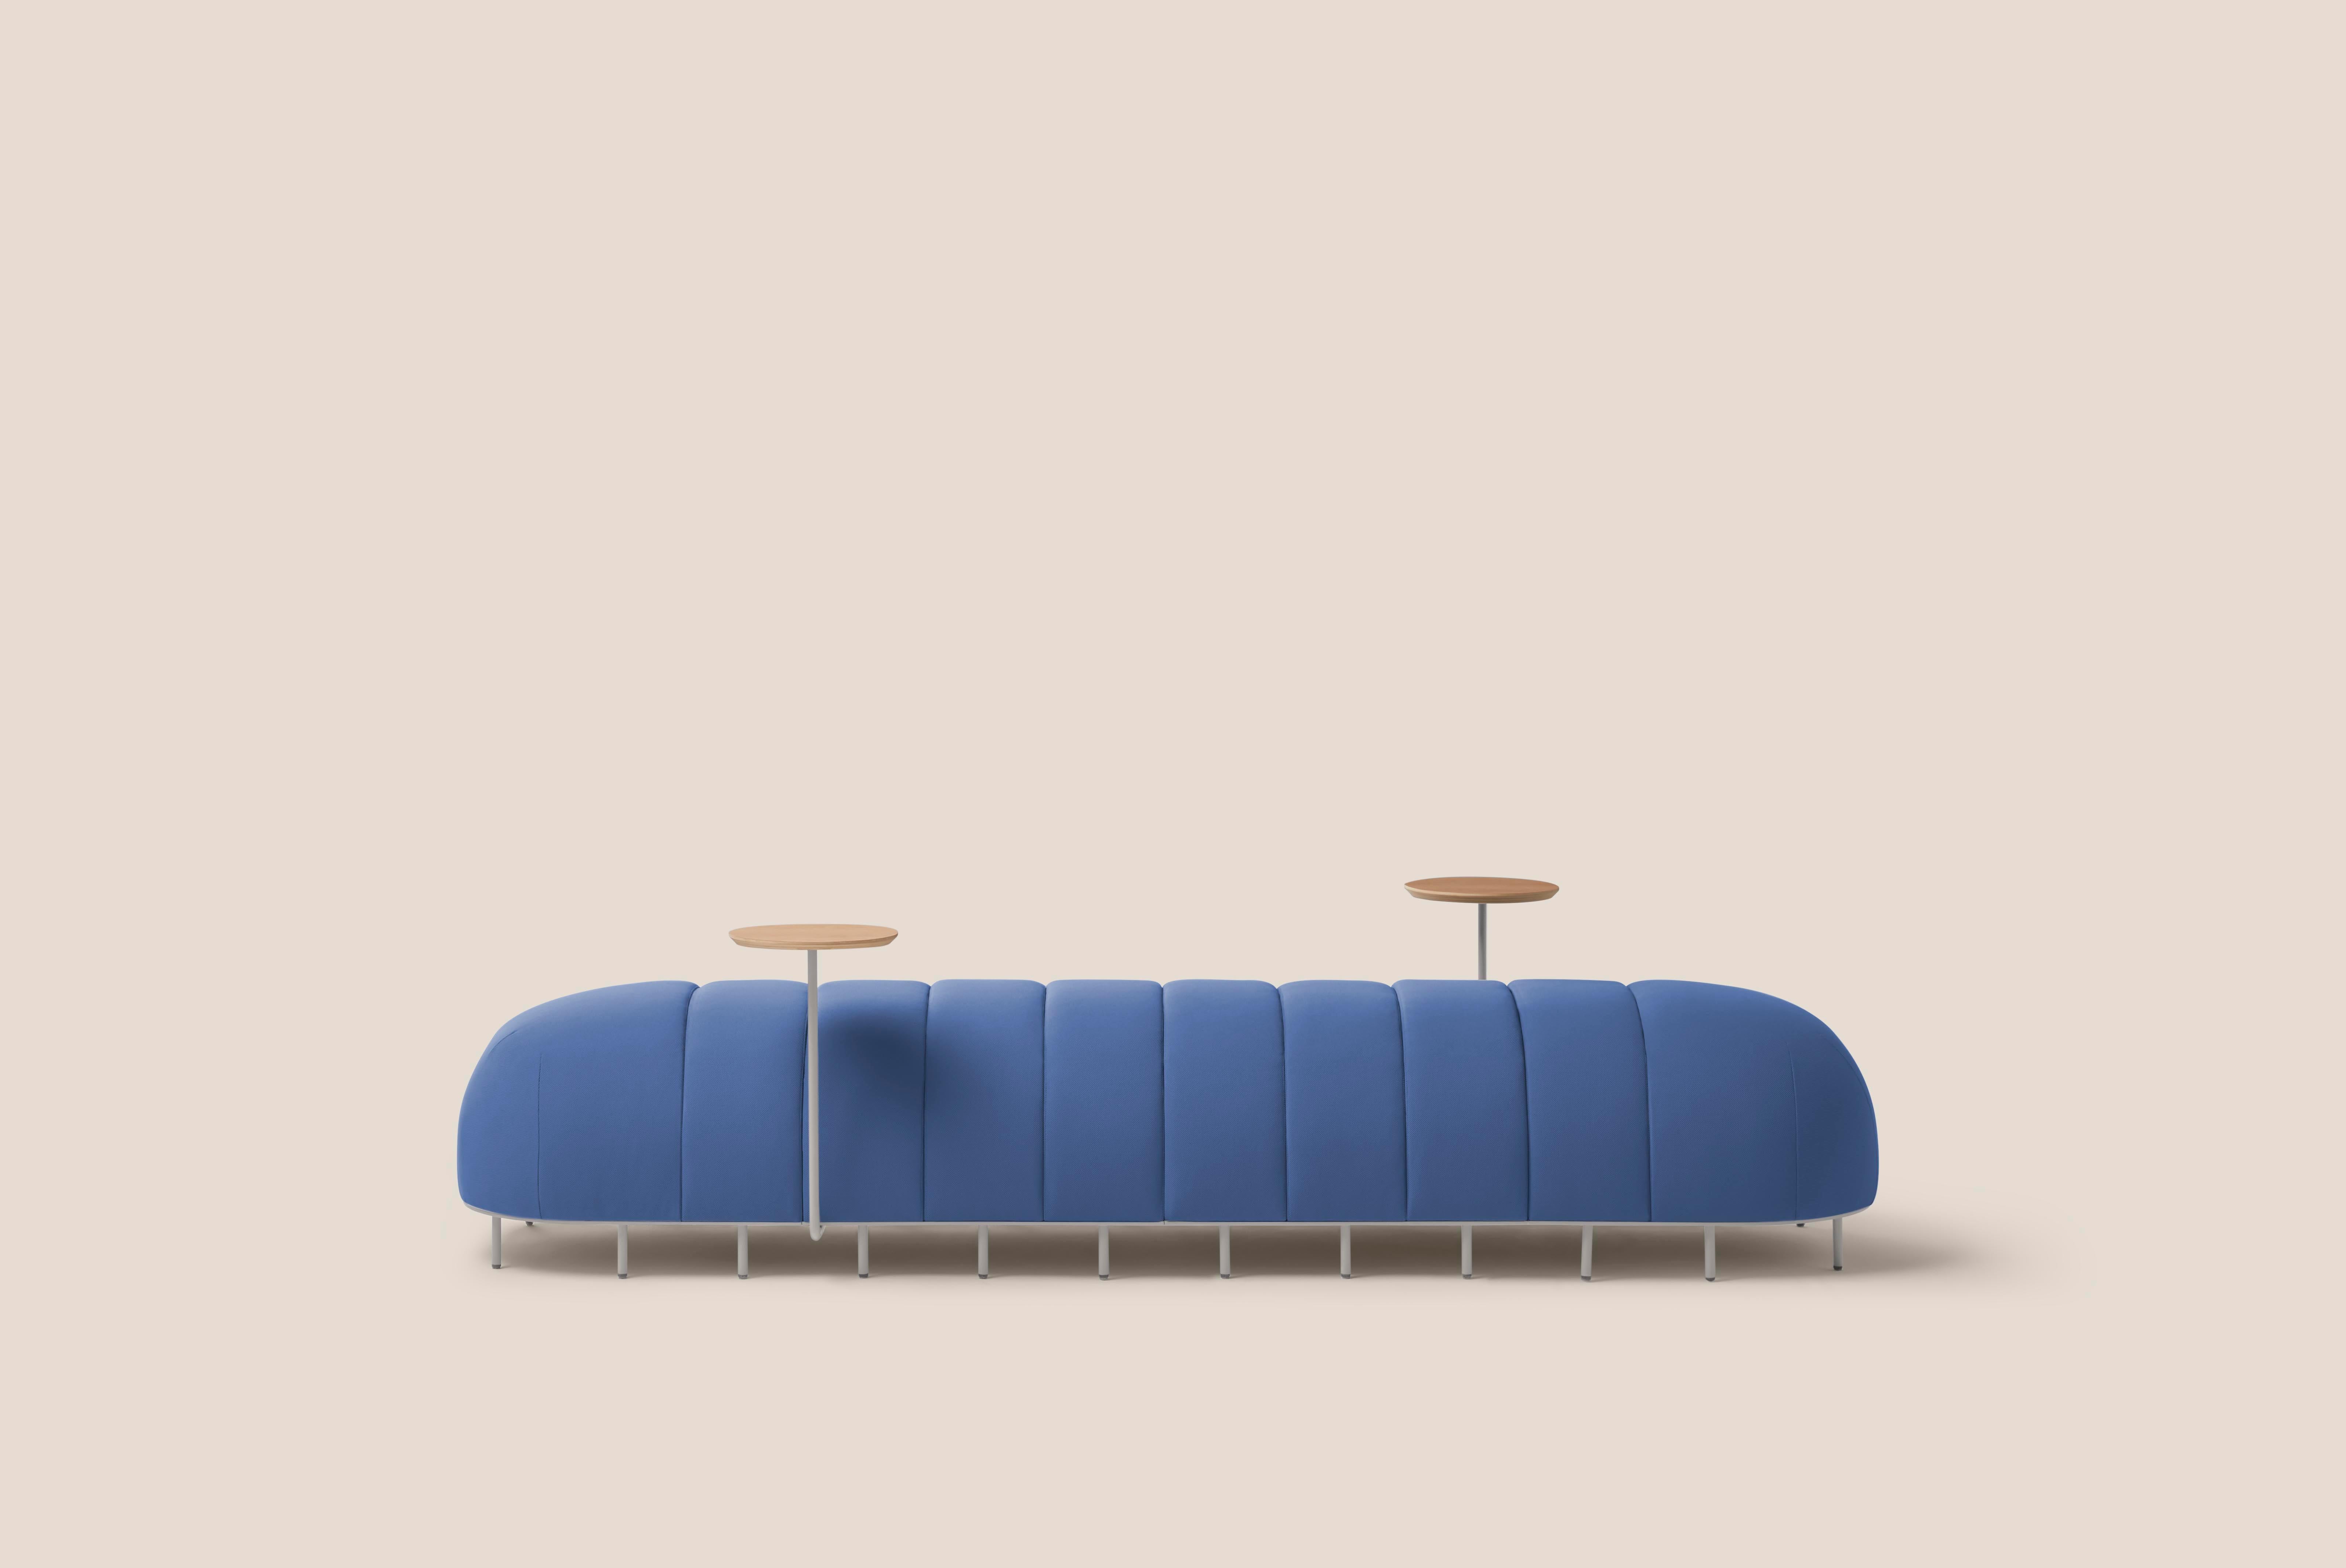 Blue worm bench VI by Clap Studio
Dimensions: D 65 x W 230 x H 50 cm
Materials: Plywood, foam CMHR, iron
Available in different colors. Custom modules convinations available

2 x straight module
2 x end module
2 x side table

Worm is an